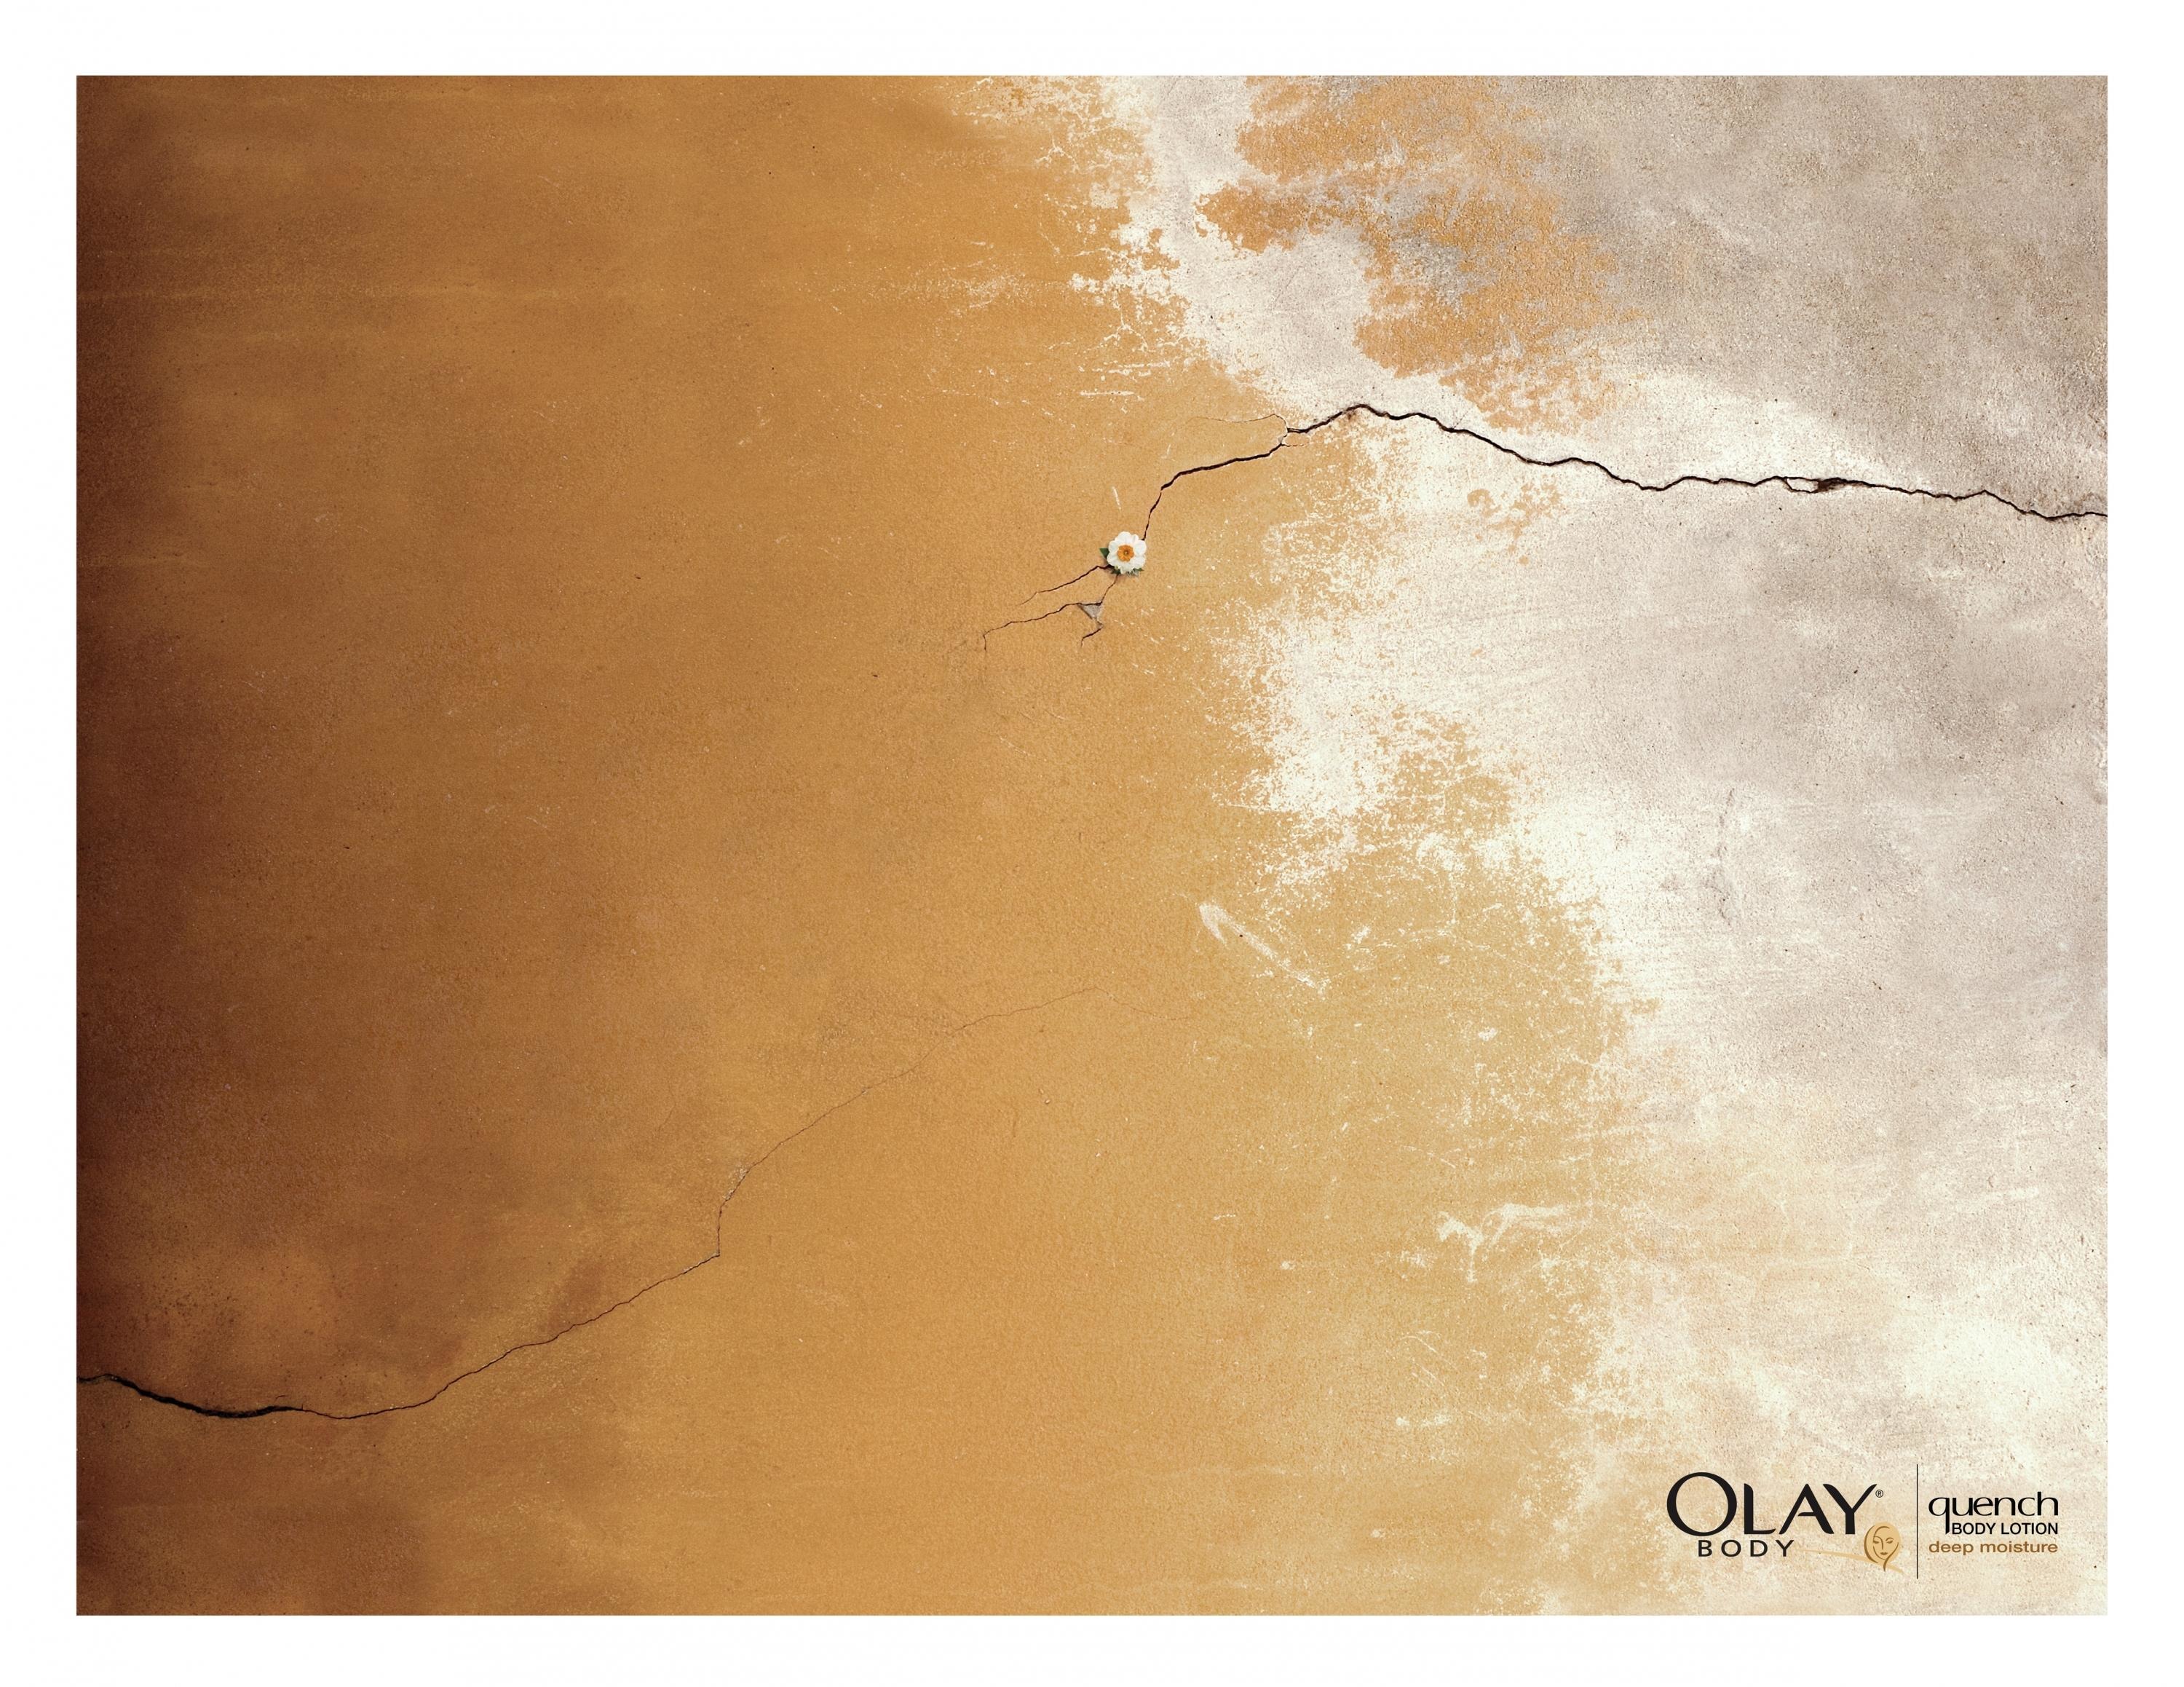 OLAY/QUENCH BODY LOTION